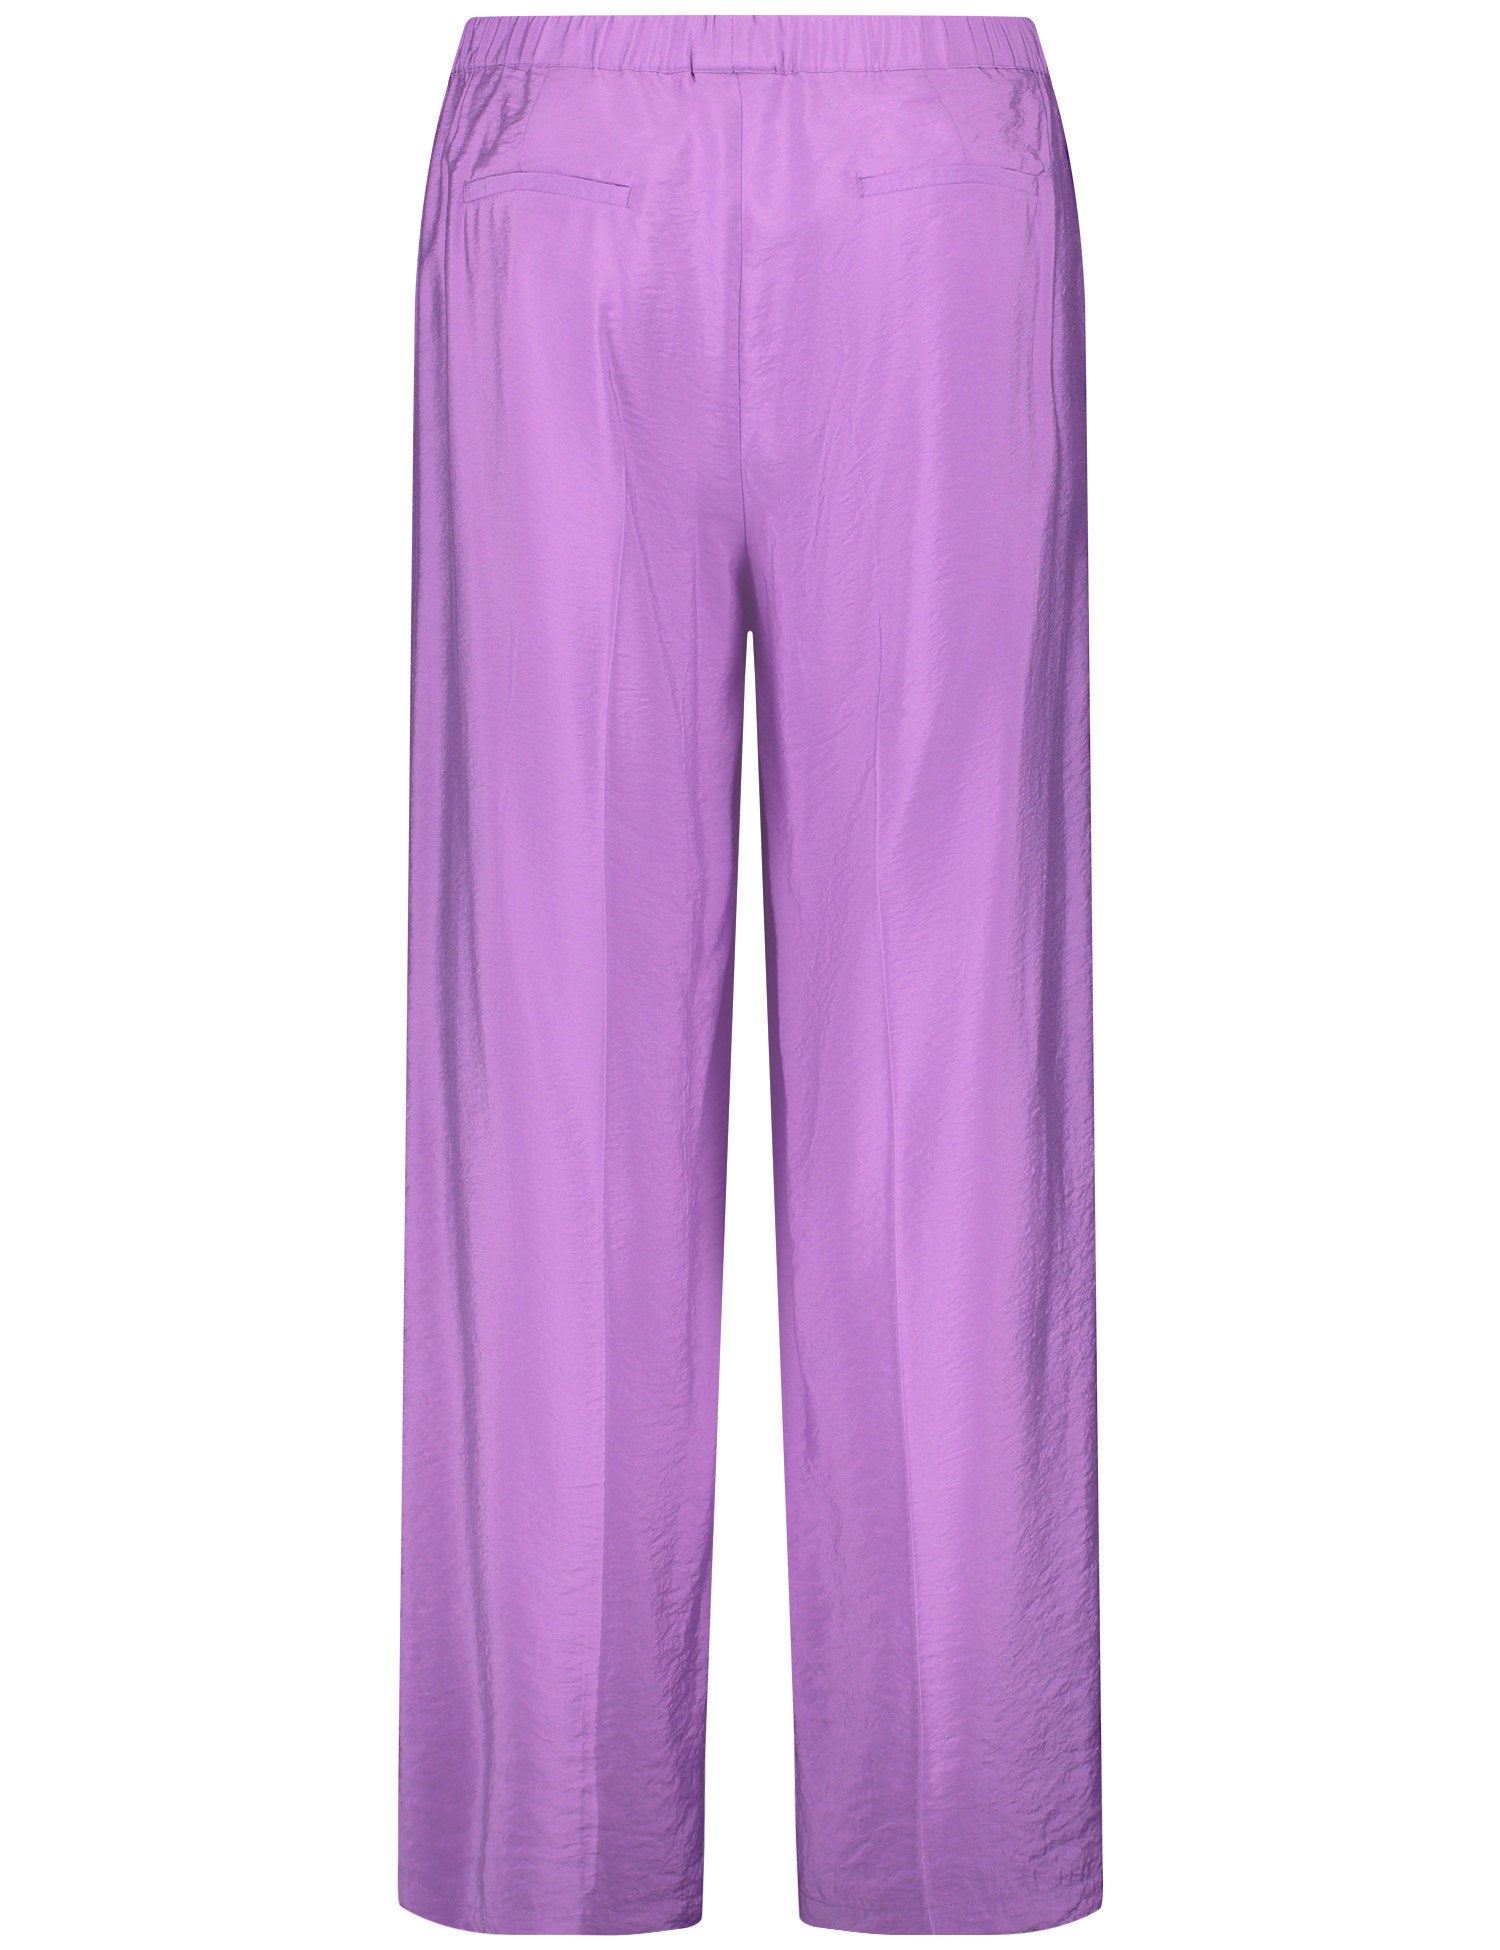 Wide Trousers With A Subtle Shimmer_420031-21052_3470_08